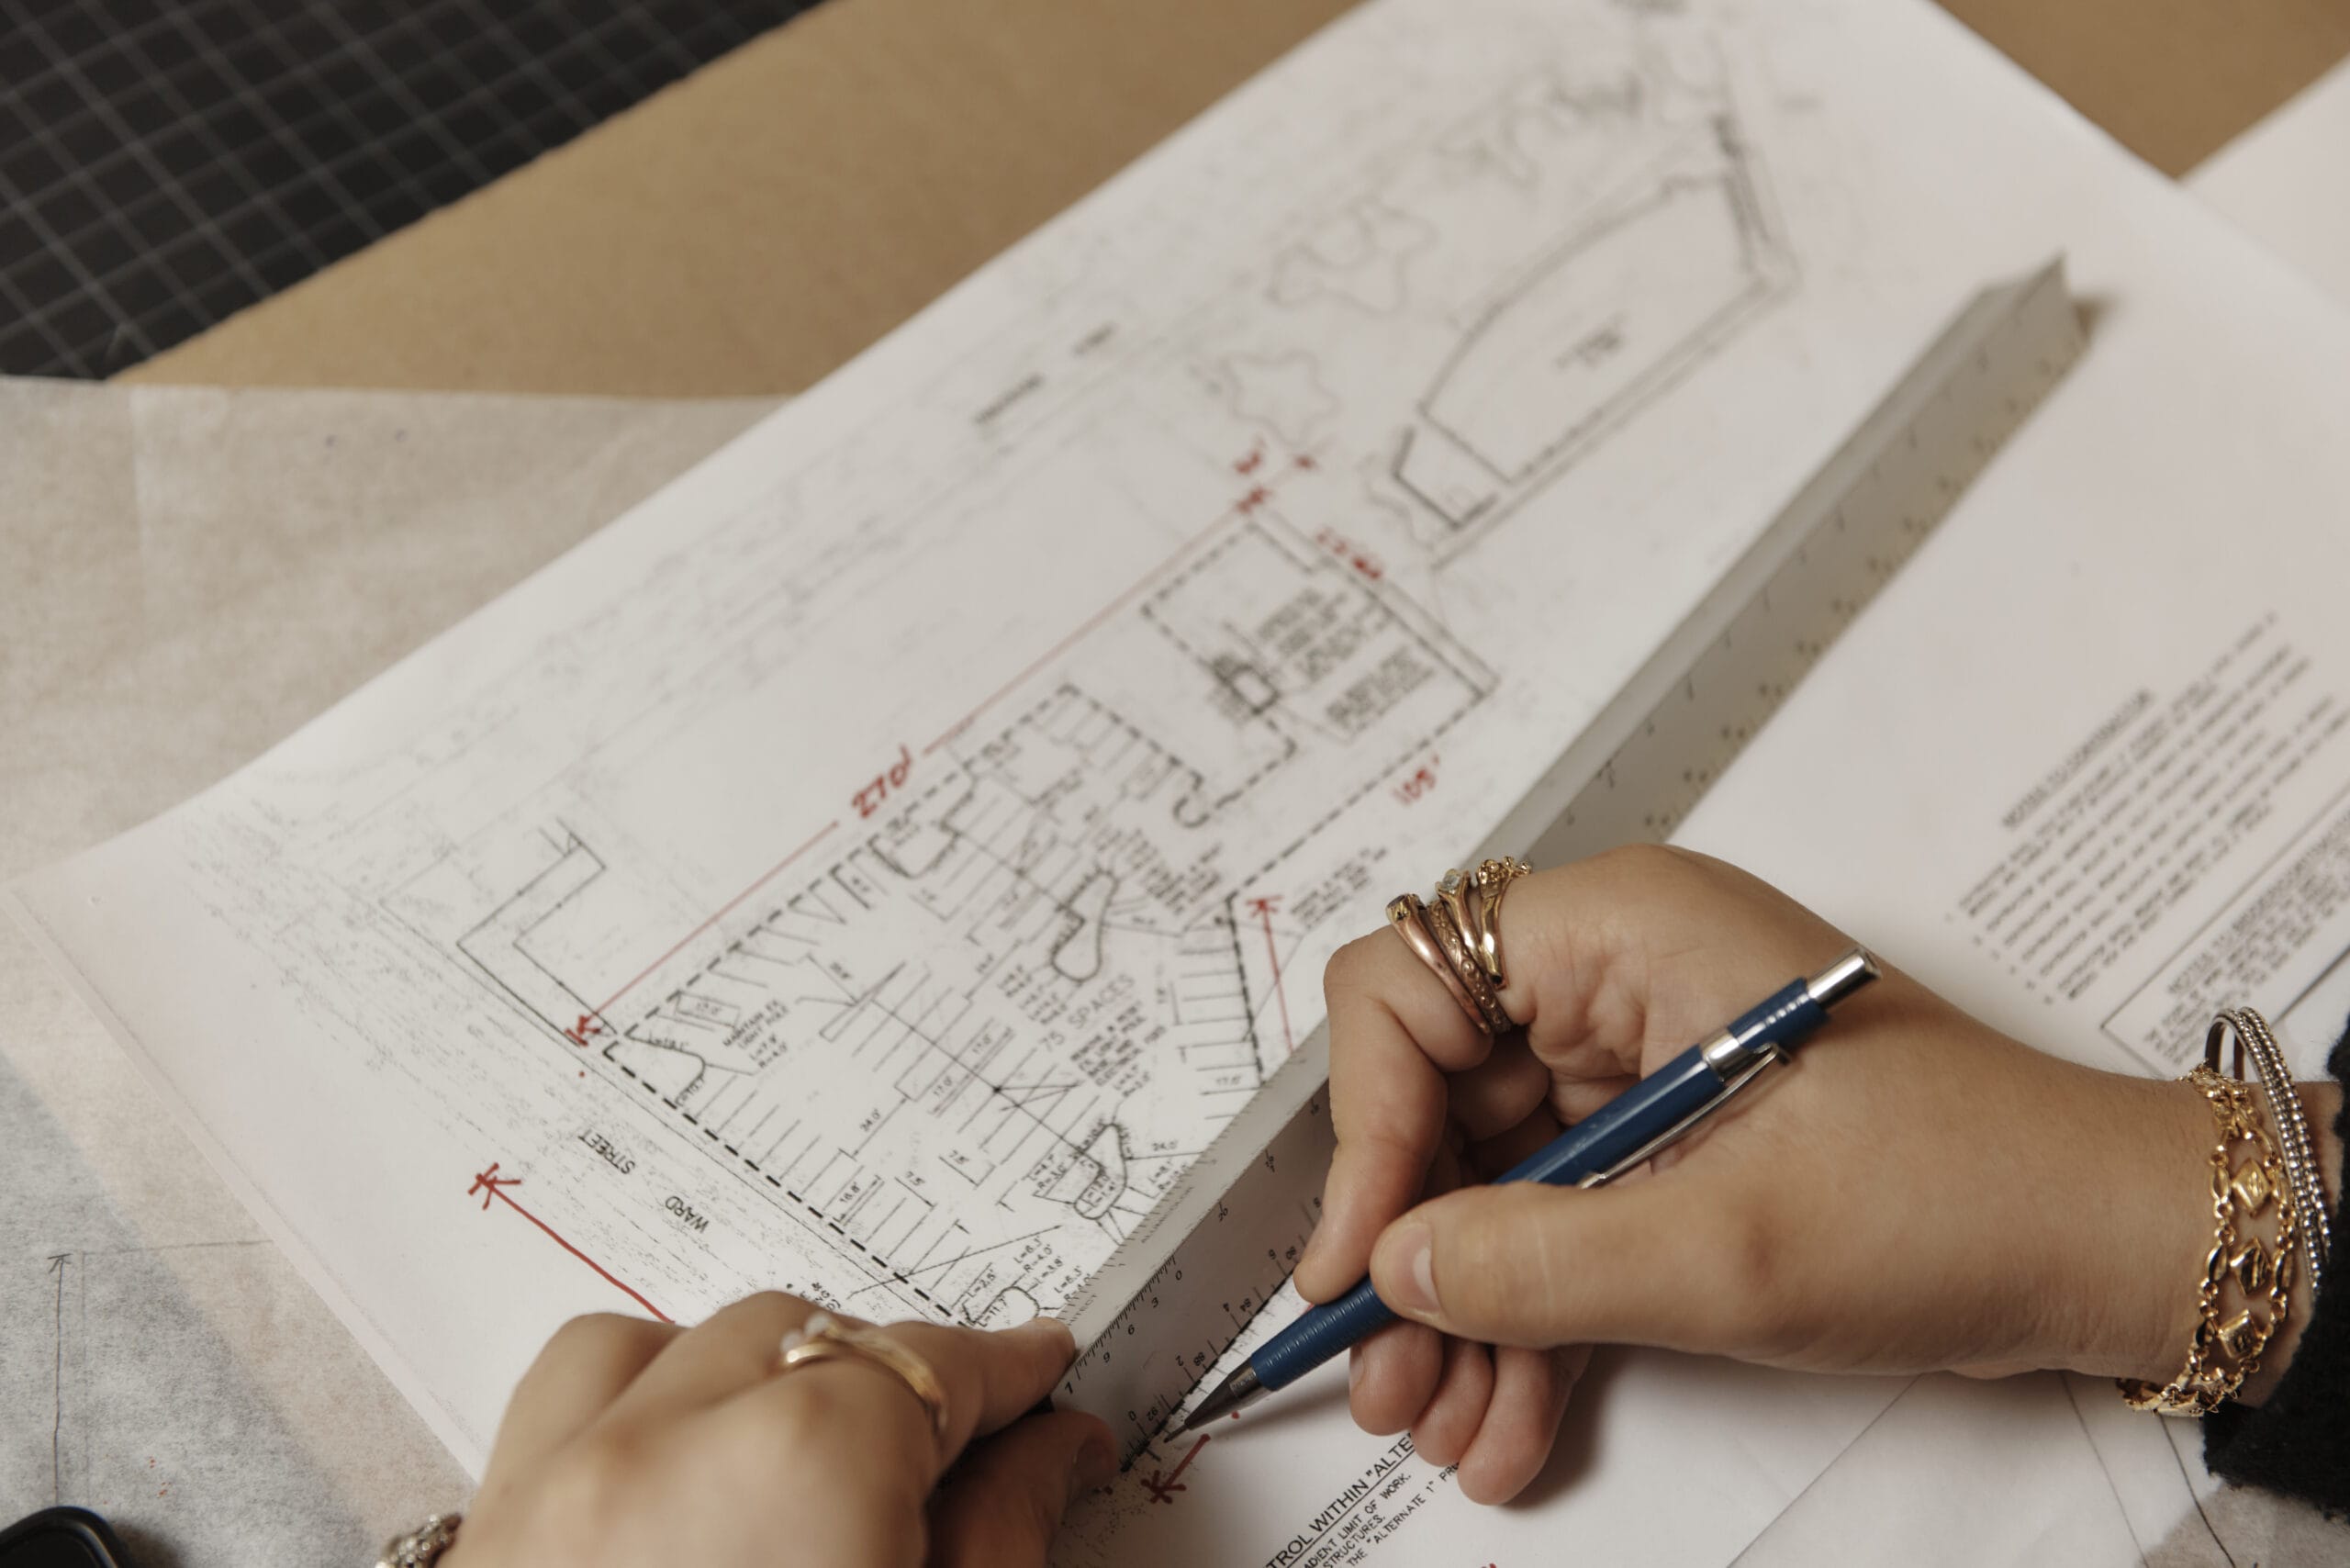 Close up of a hand and ruler drawing a straight line on architectural plans.